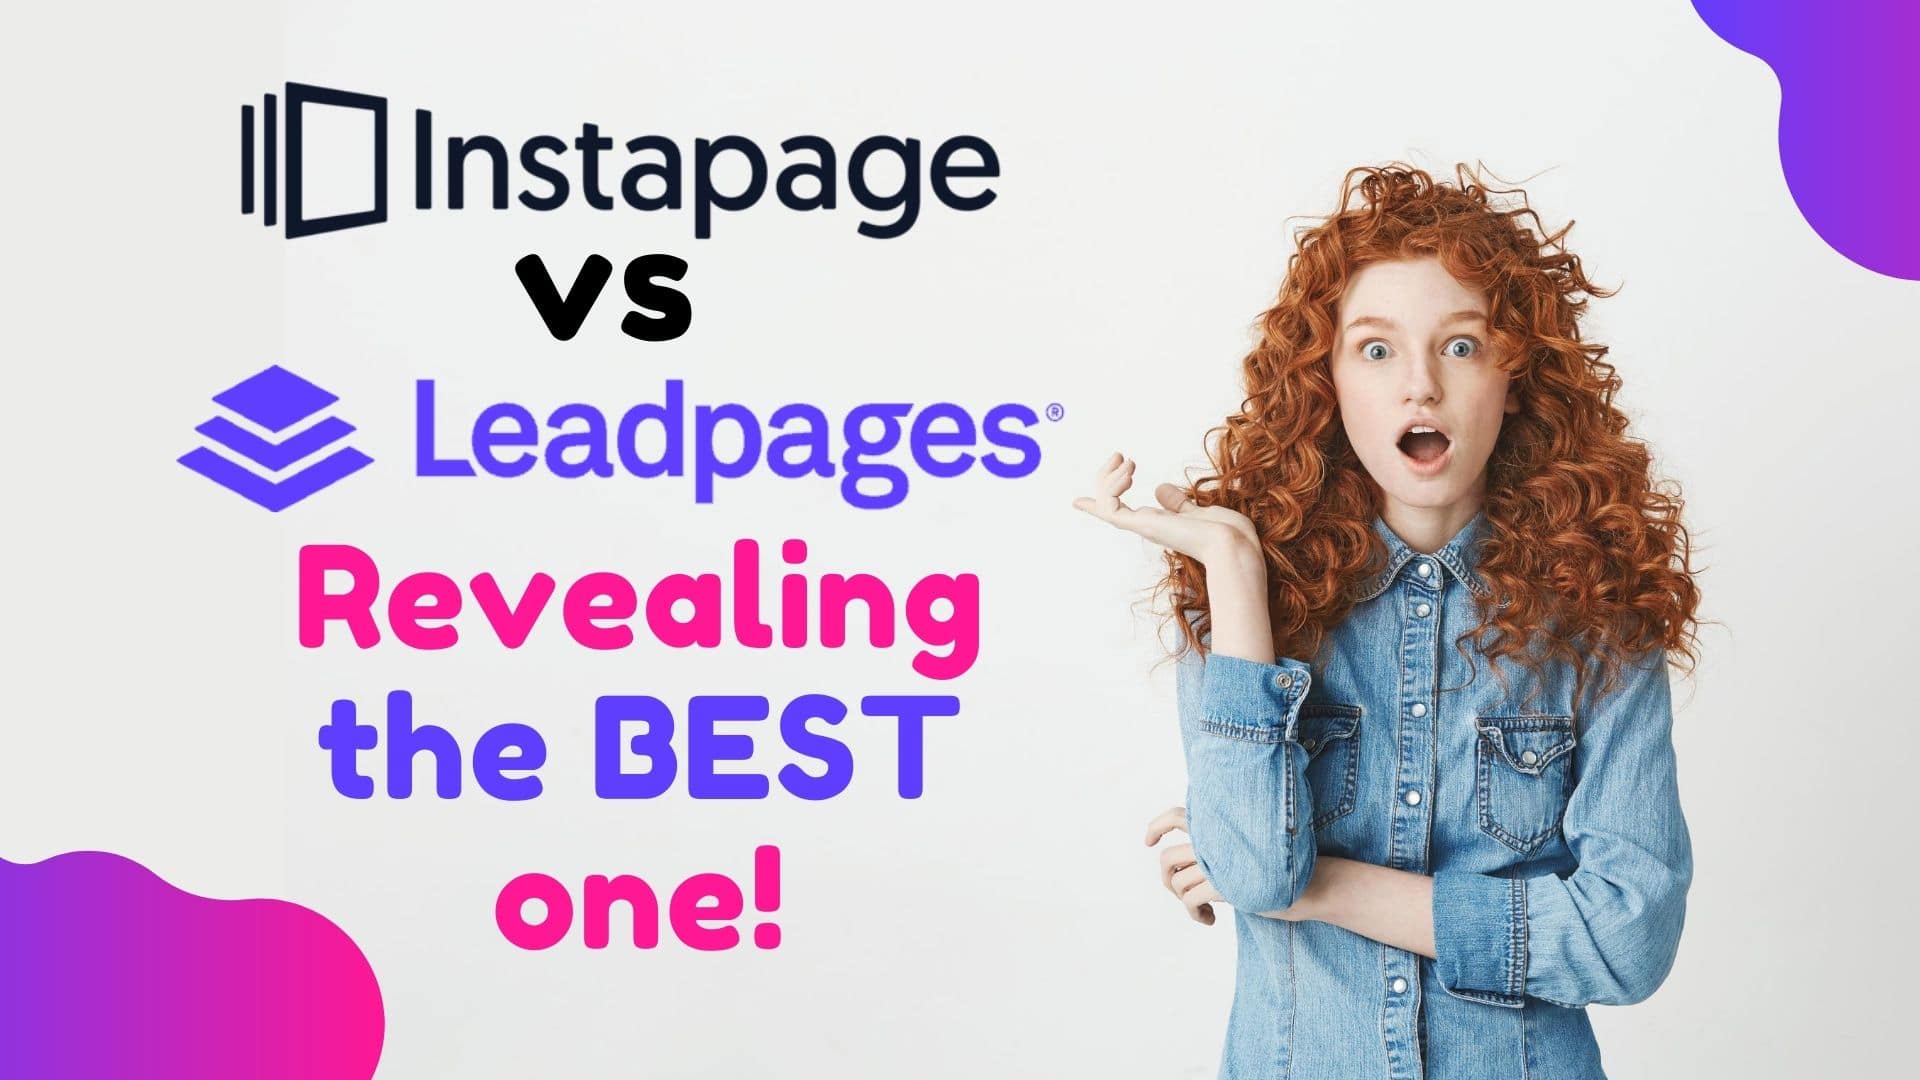 Leadpages vs Instapage